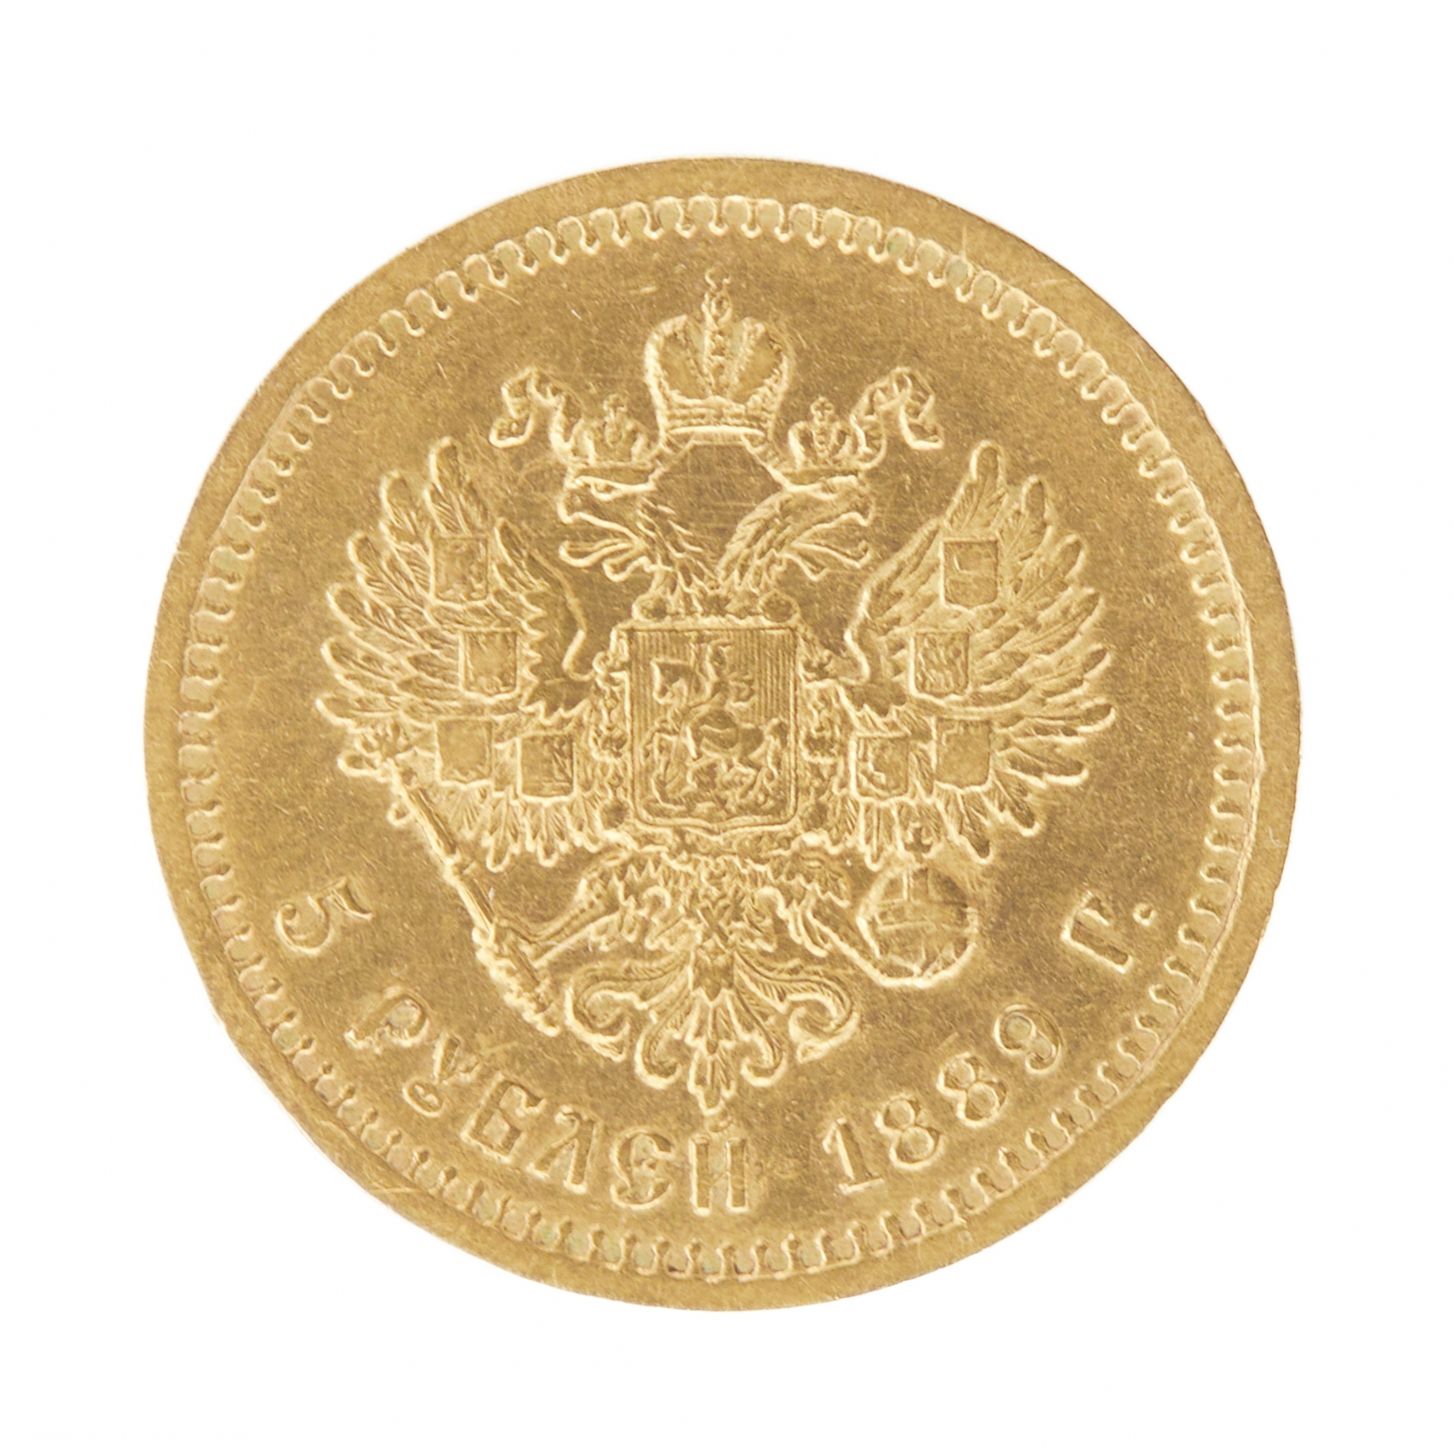 Gold coin 5 rubles 1889. Alexander III (1882-1894) - Image 3 of 3